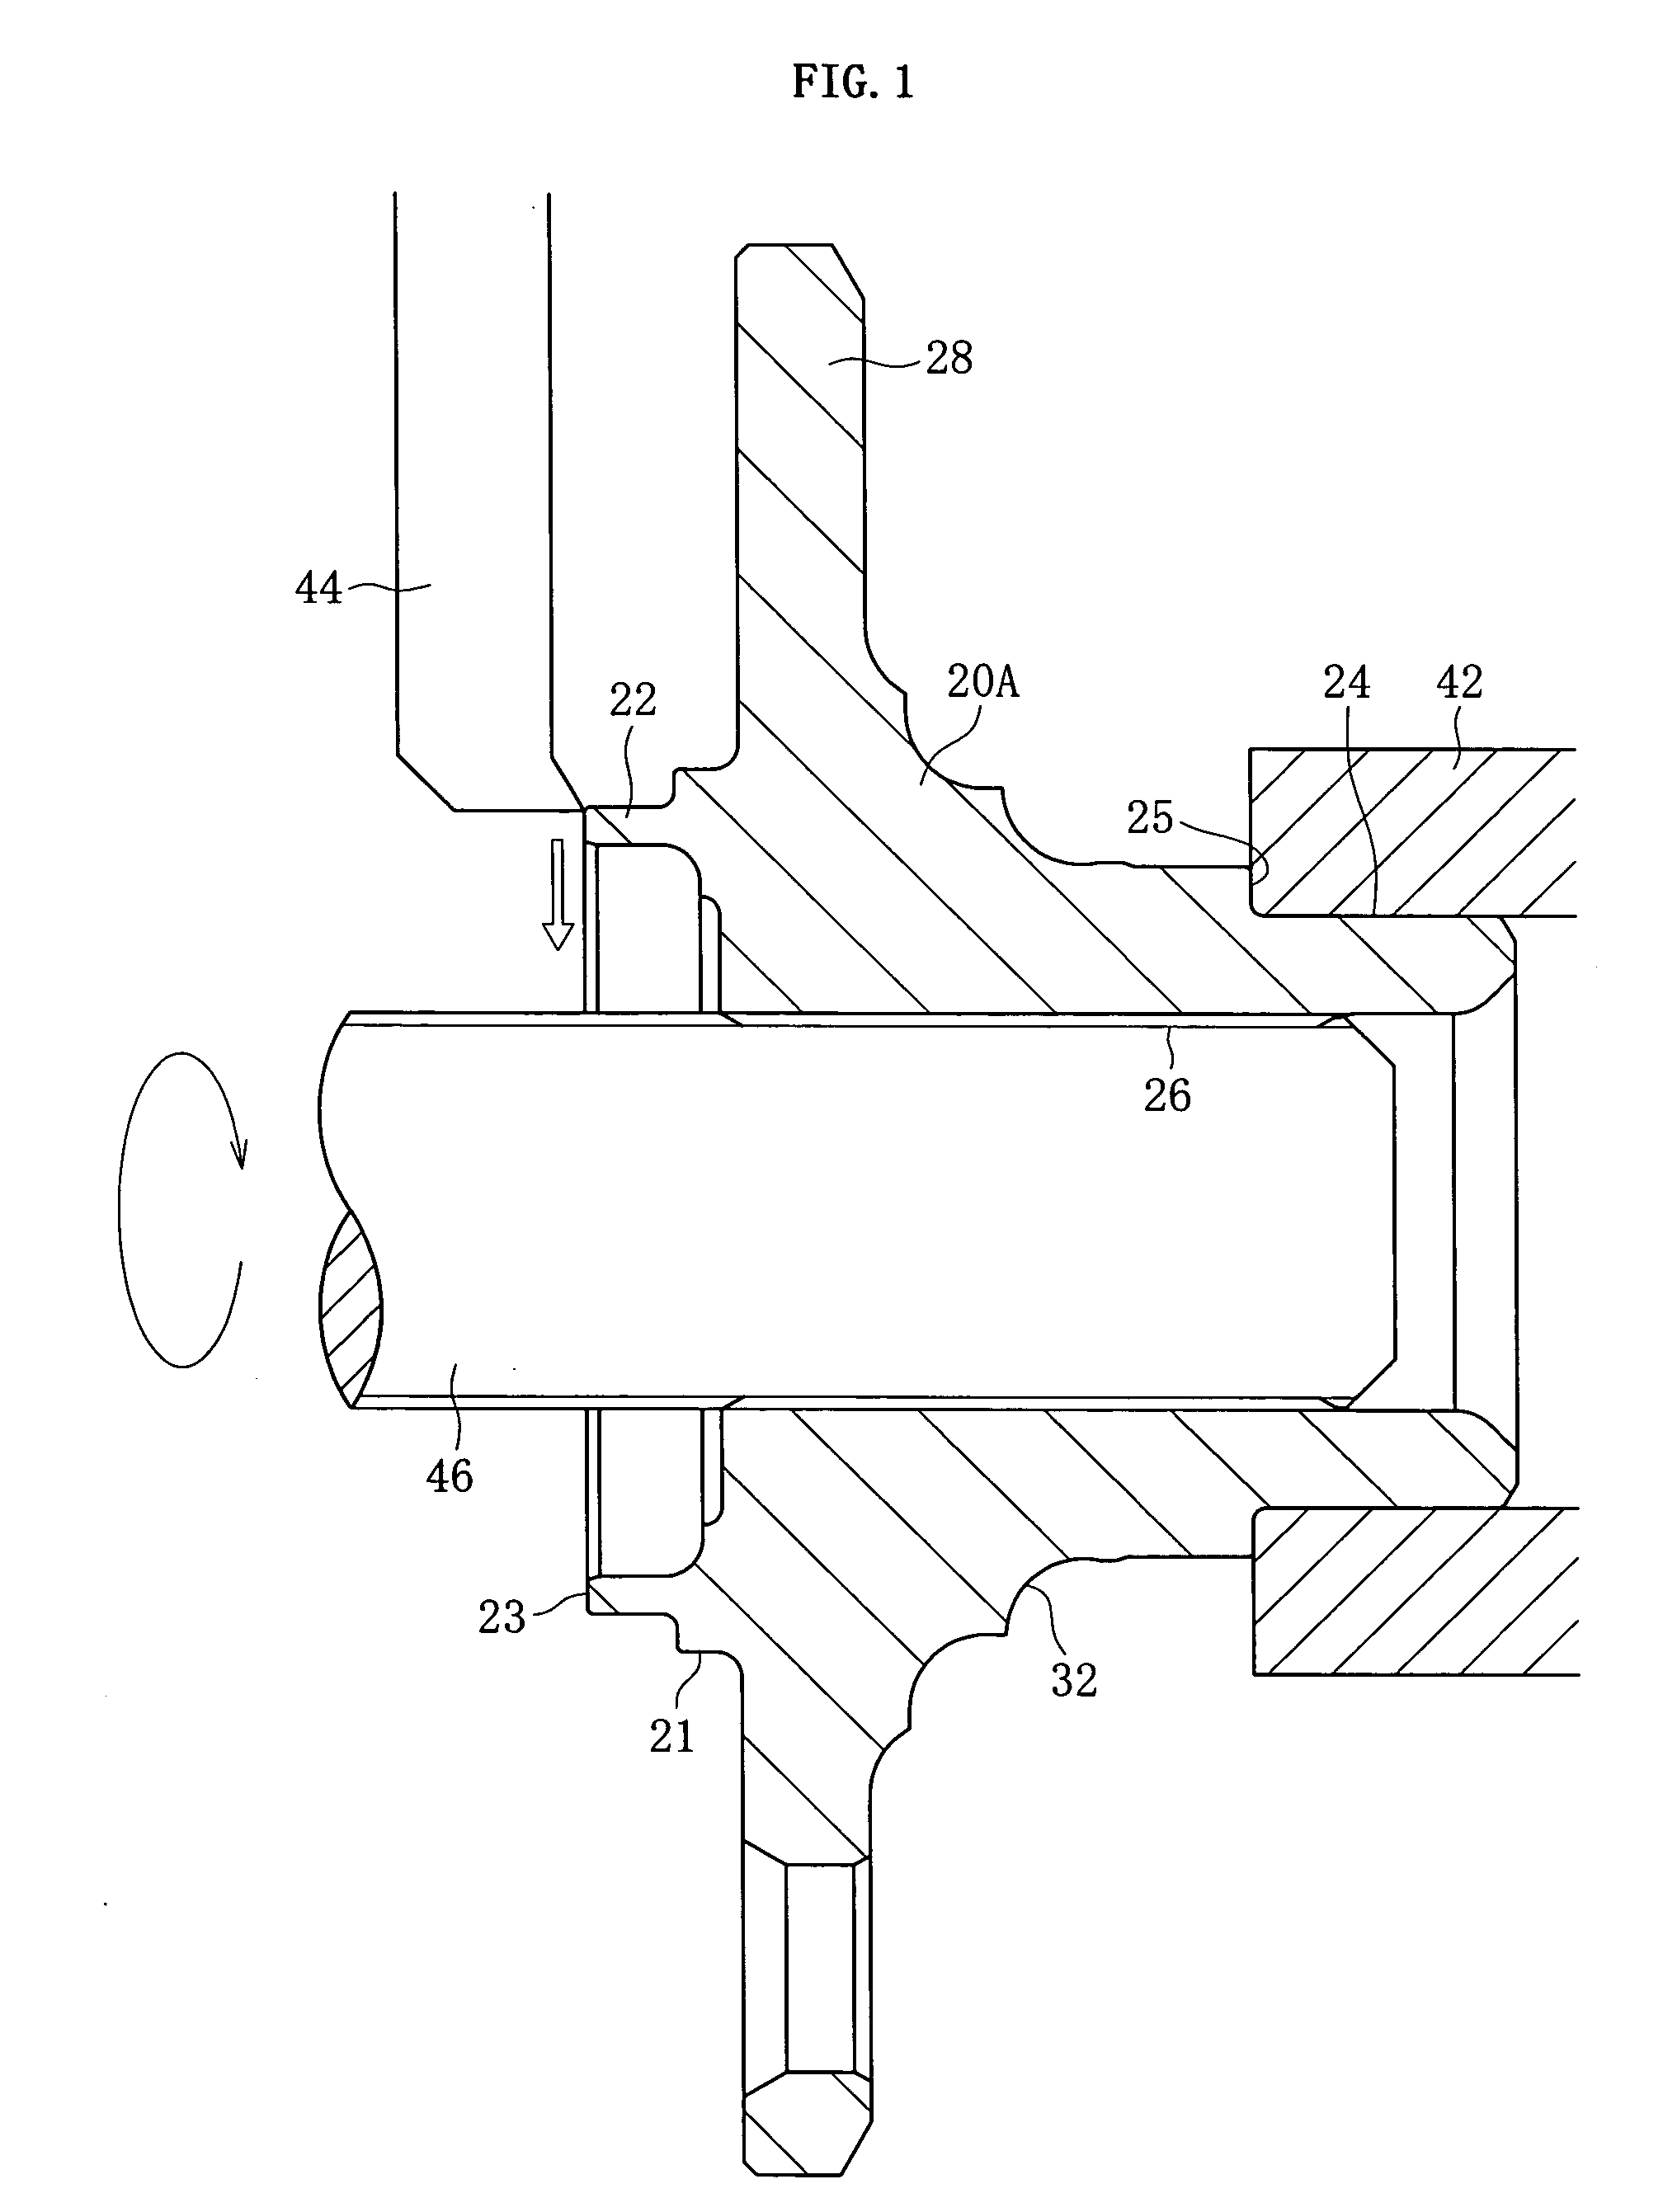 Processing method for brake rotor-equipped wheel bearing devices